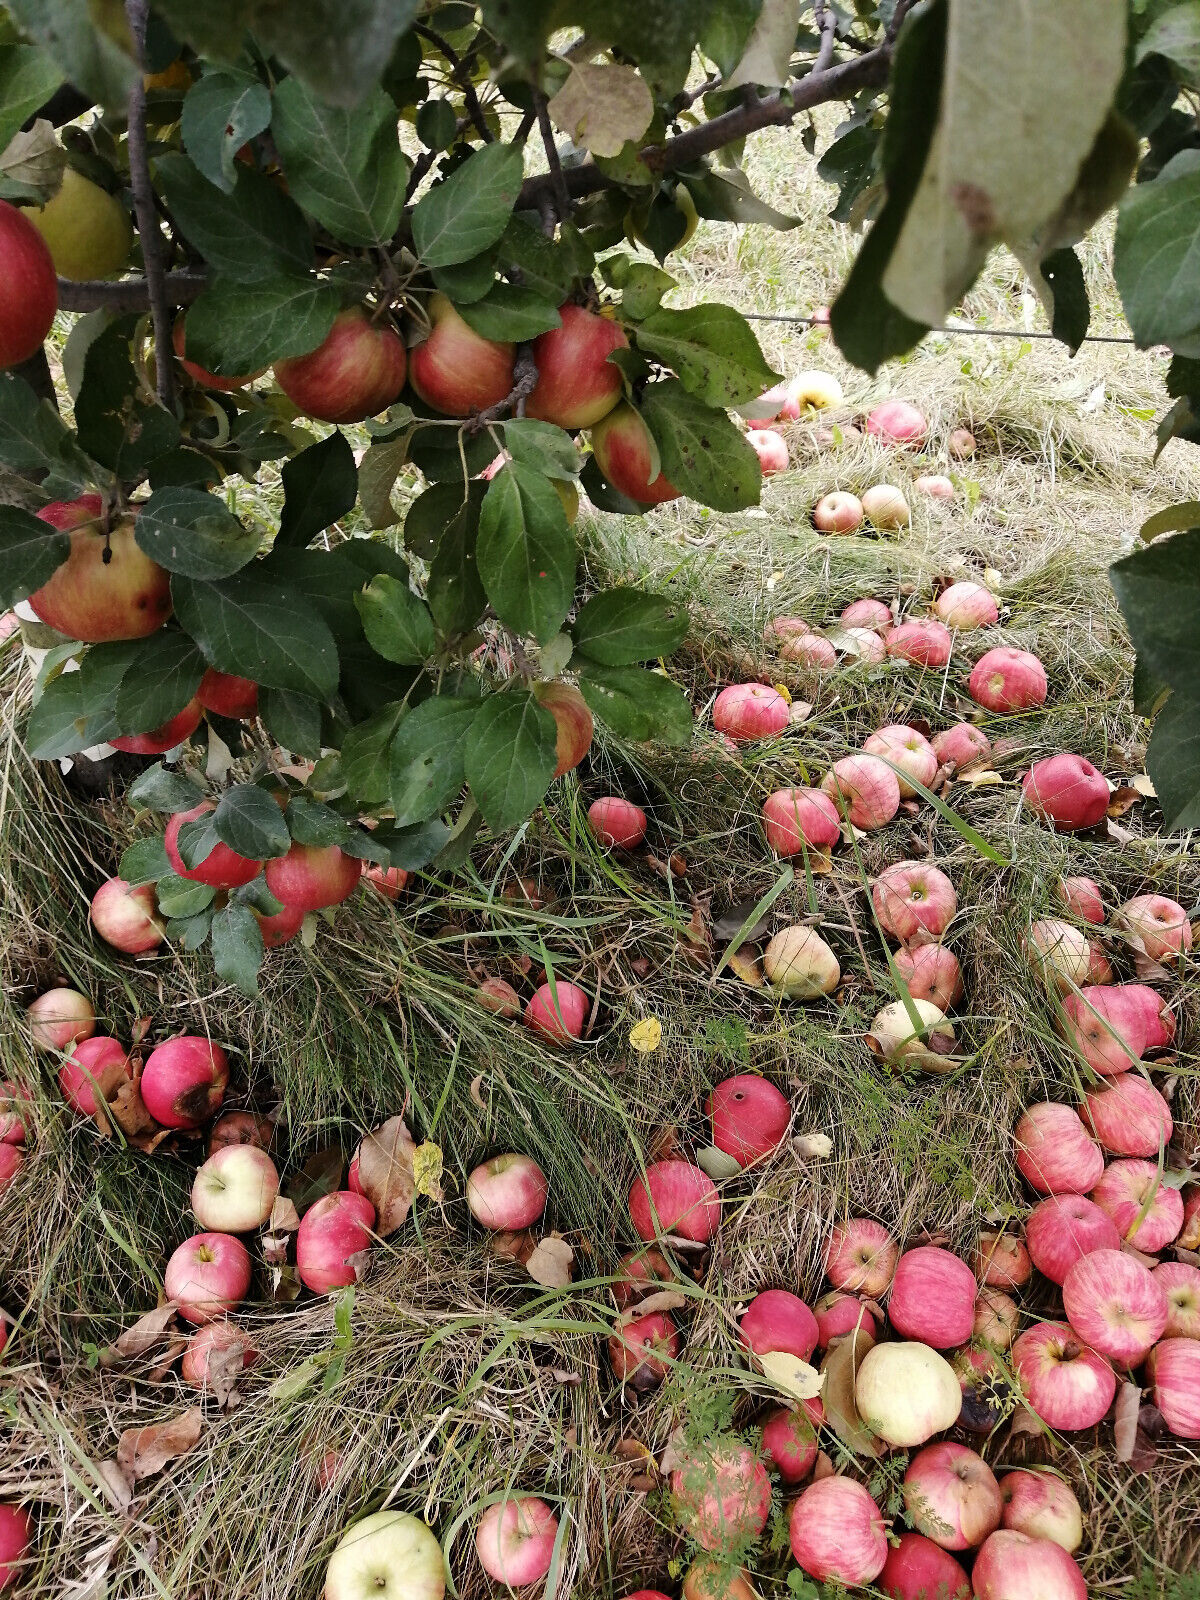 Ontario Organic Apples, 10 LBS of Organic Apple for Eating or Cooking, Ontario Grown 2023 Harvest